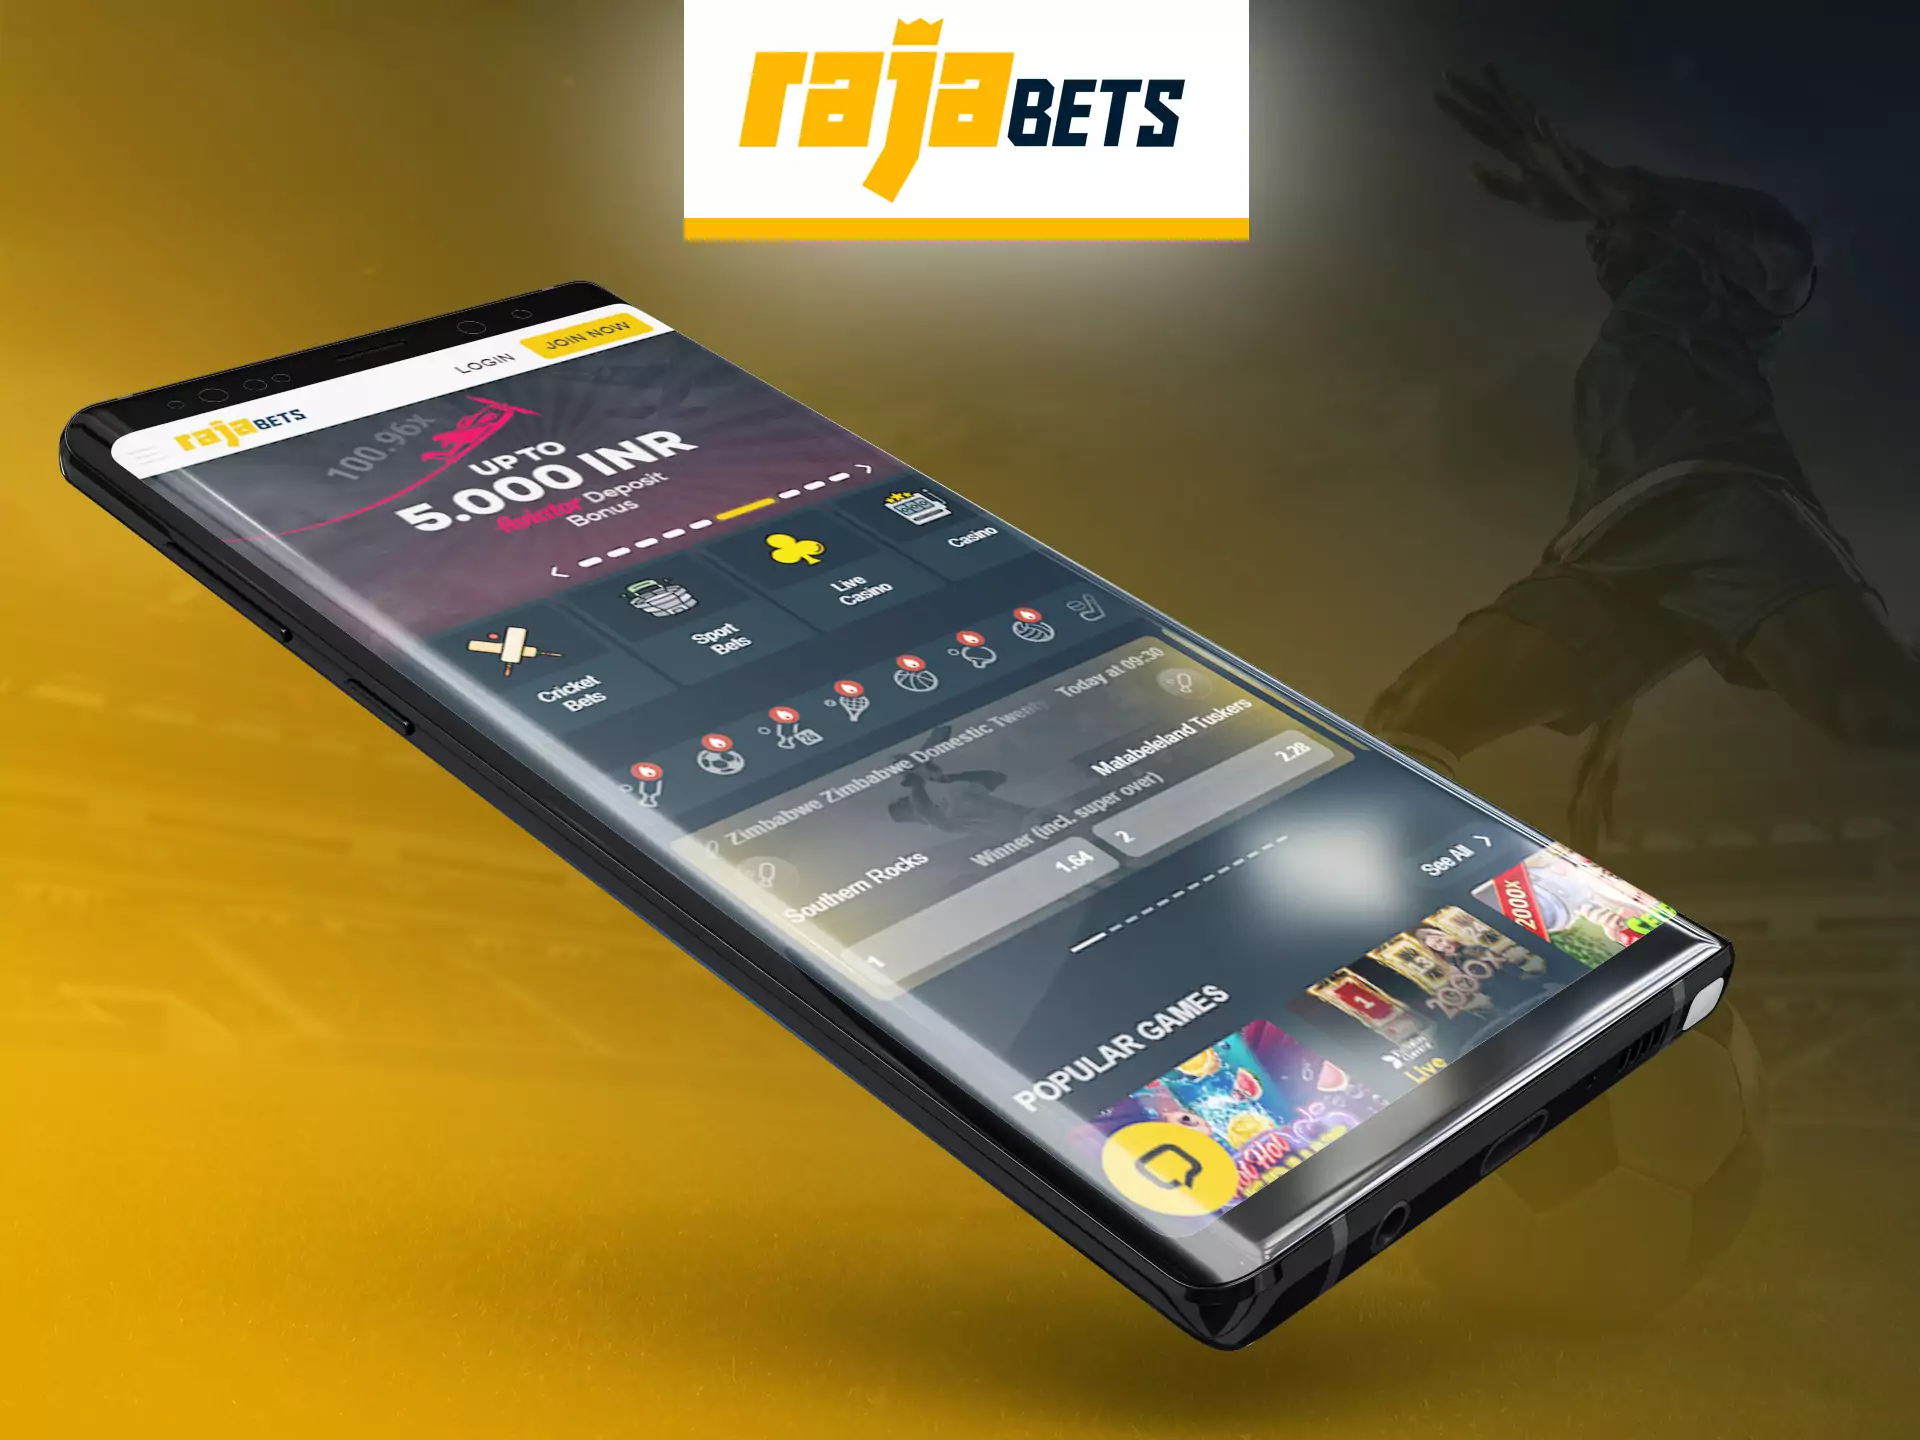 Place bets on the mobile version of the Rajabets website on your phone .